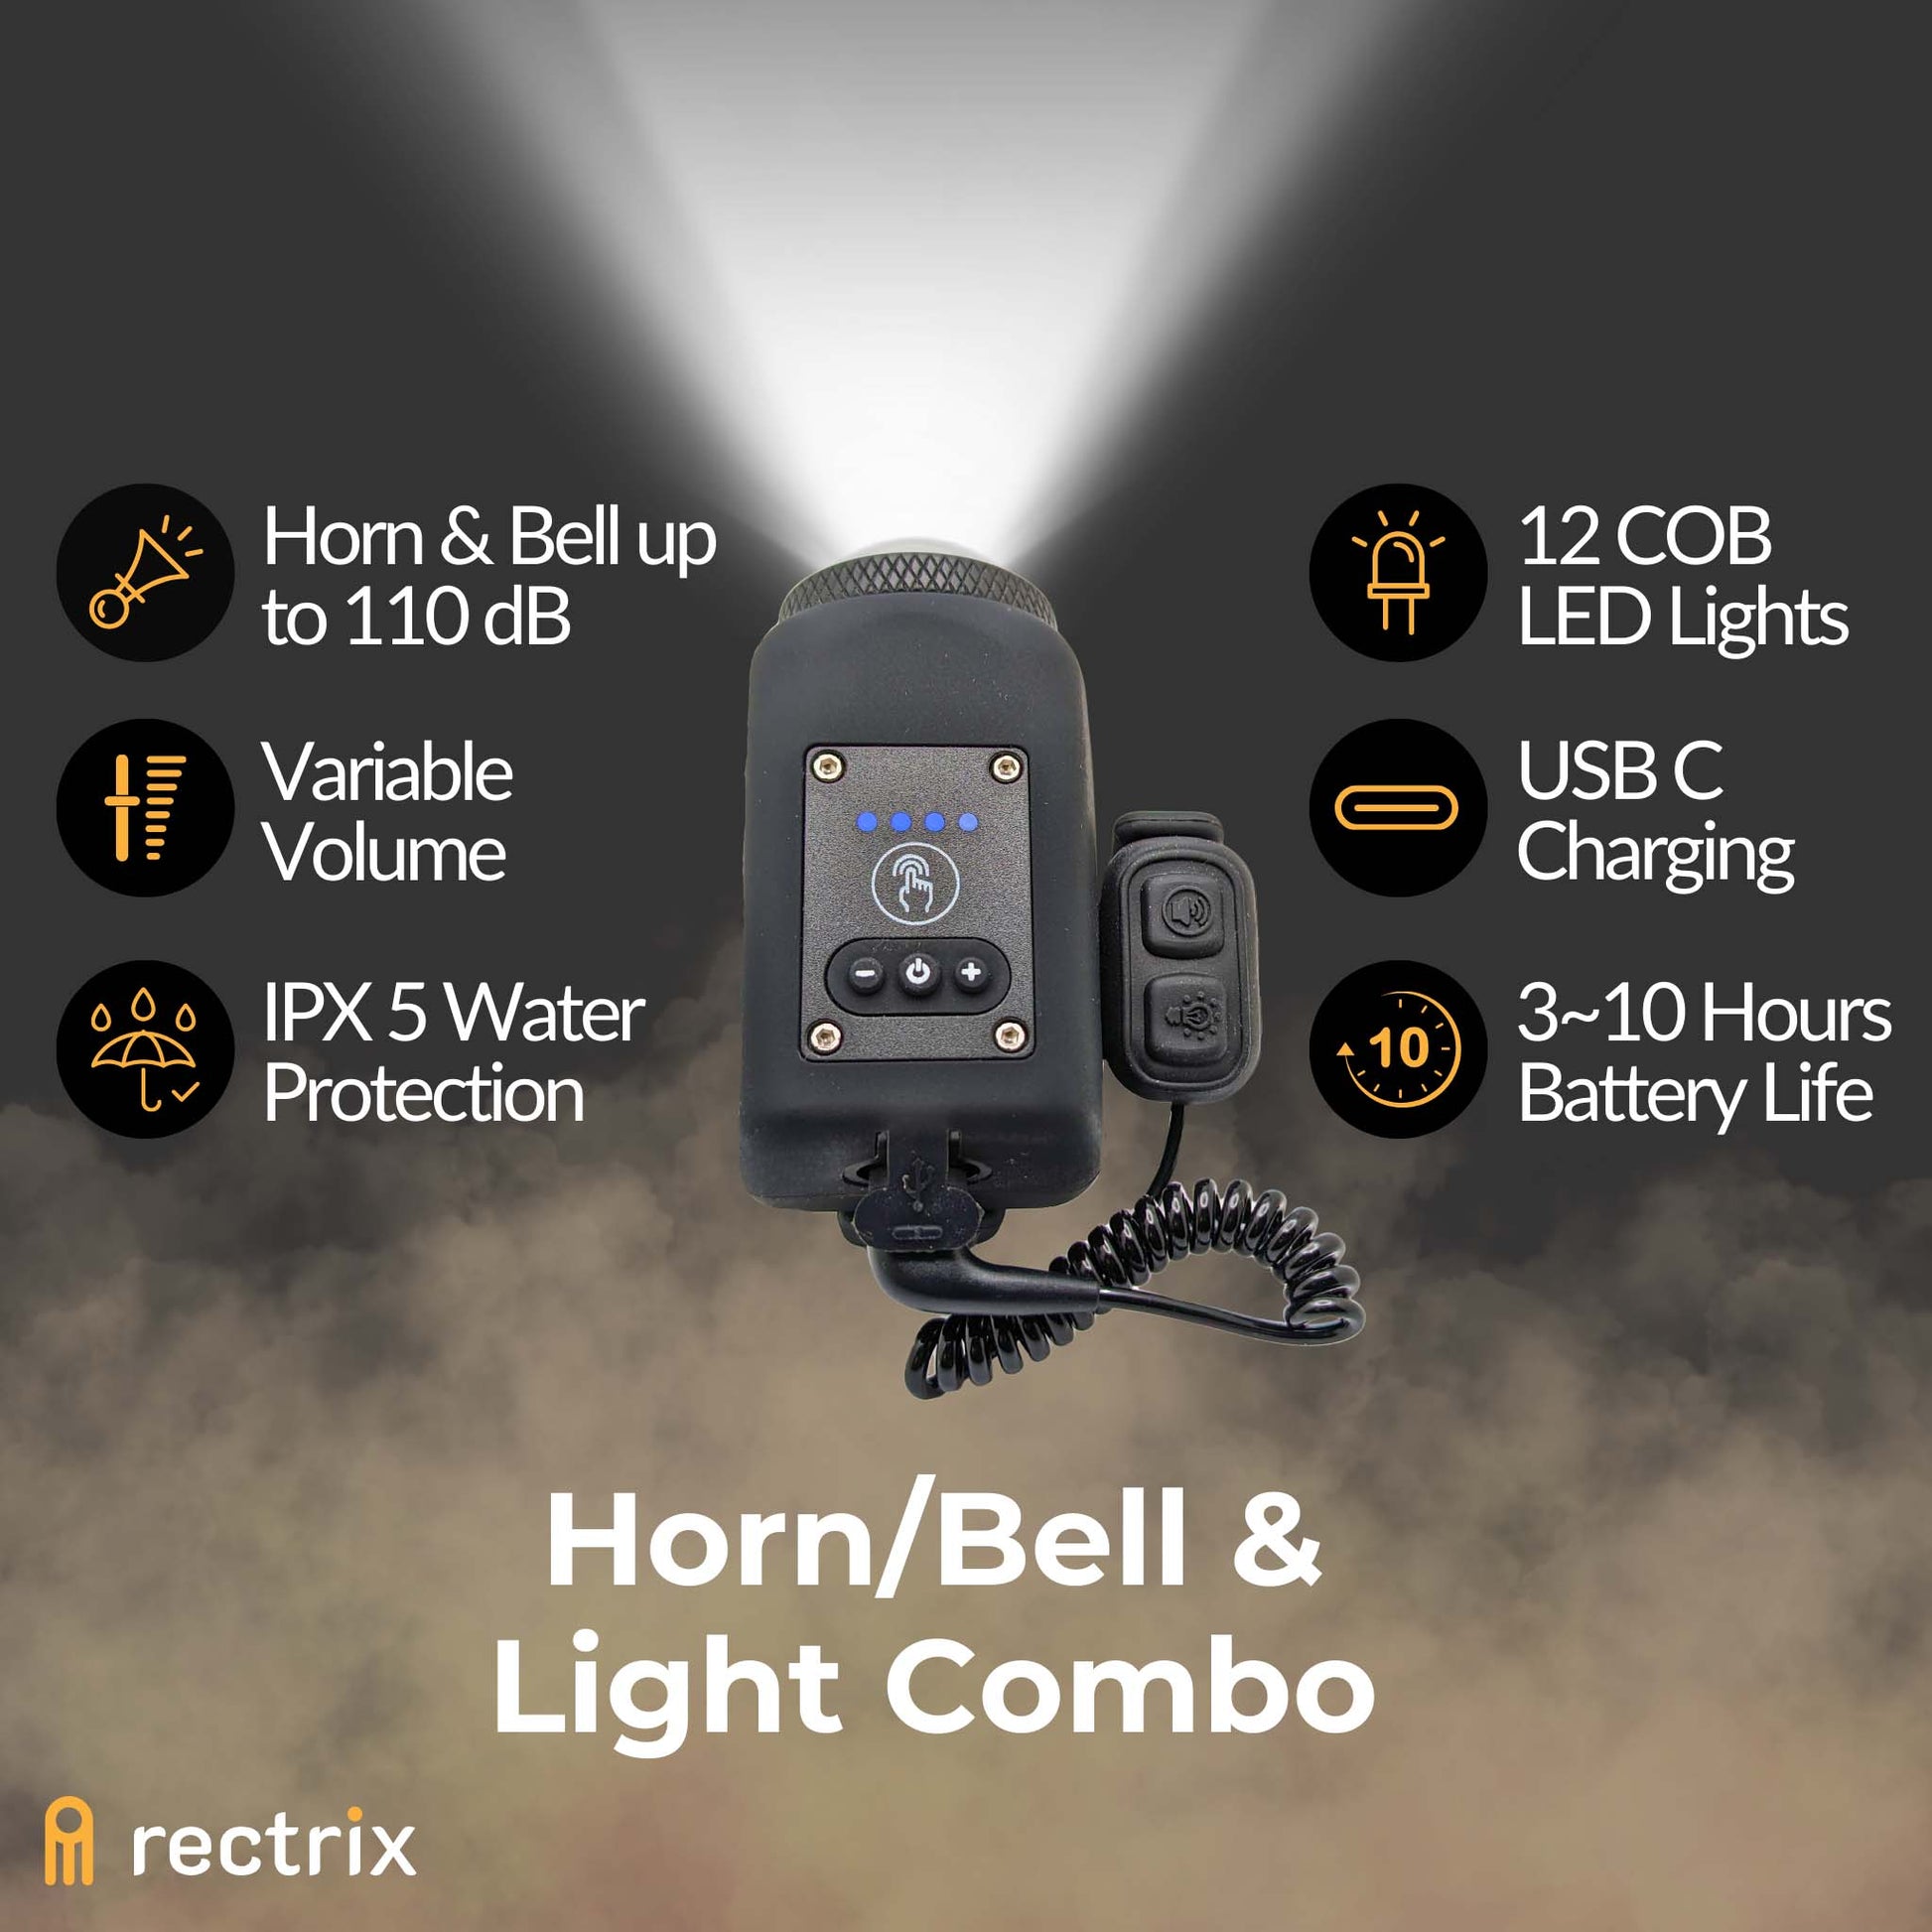 Highlighting key features of the bike horn/bell and light combo